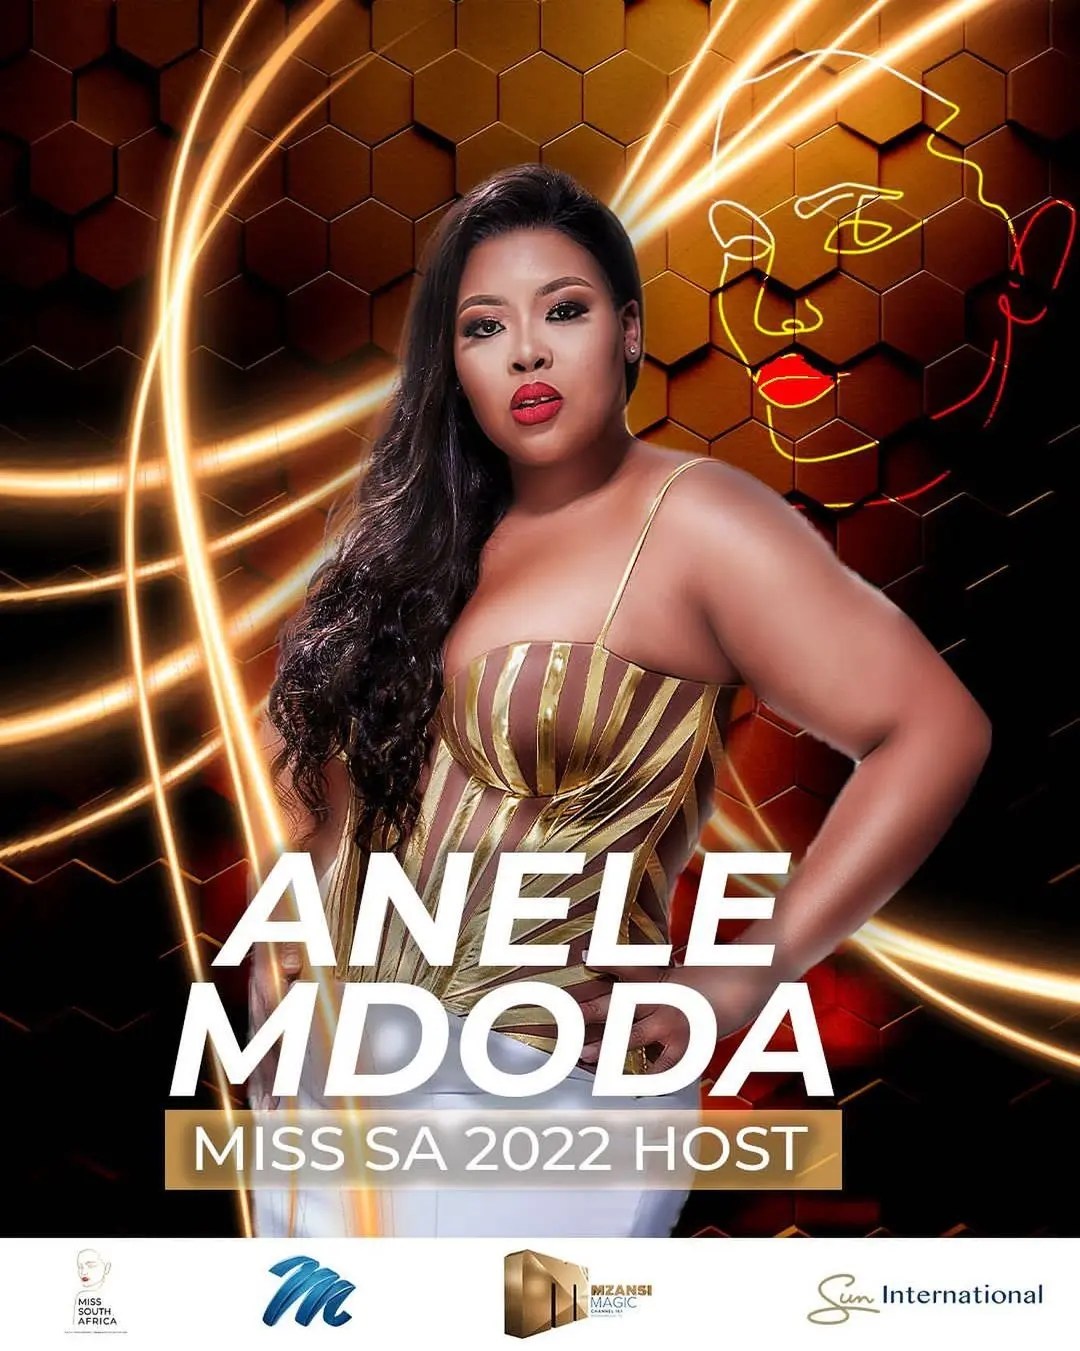 Anele Mdoda to Host Miss South Africa 2022 Pageant Finale